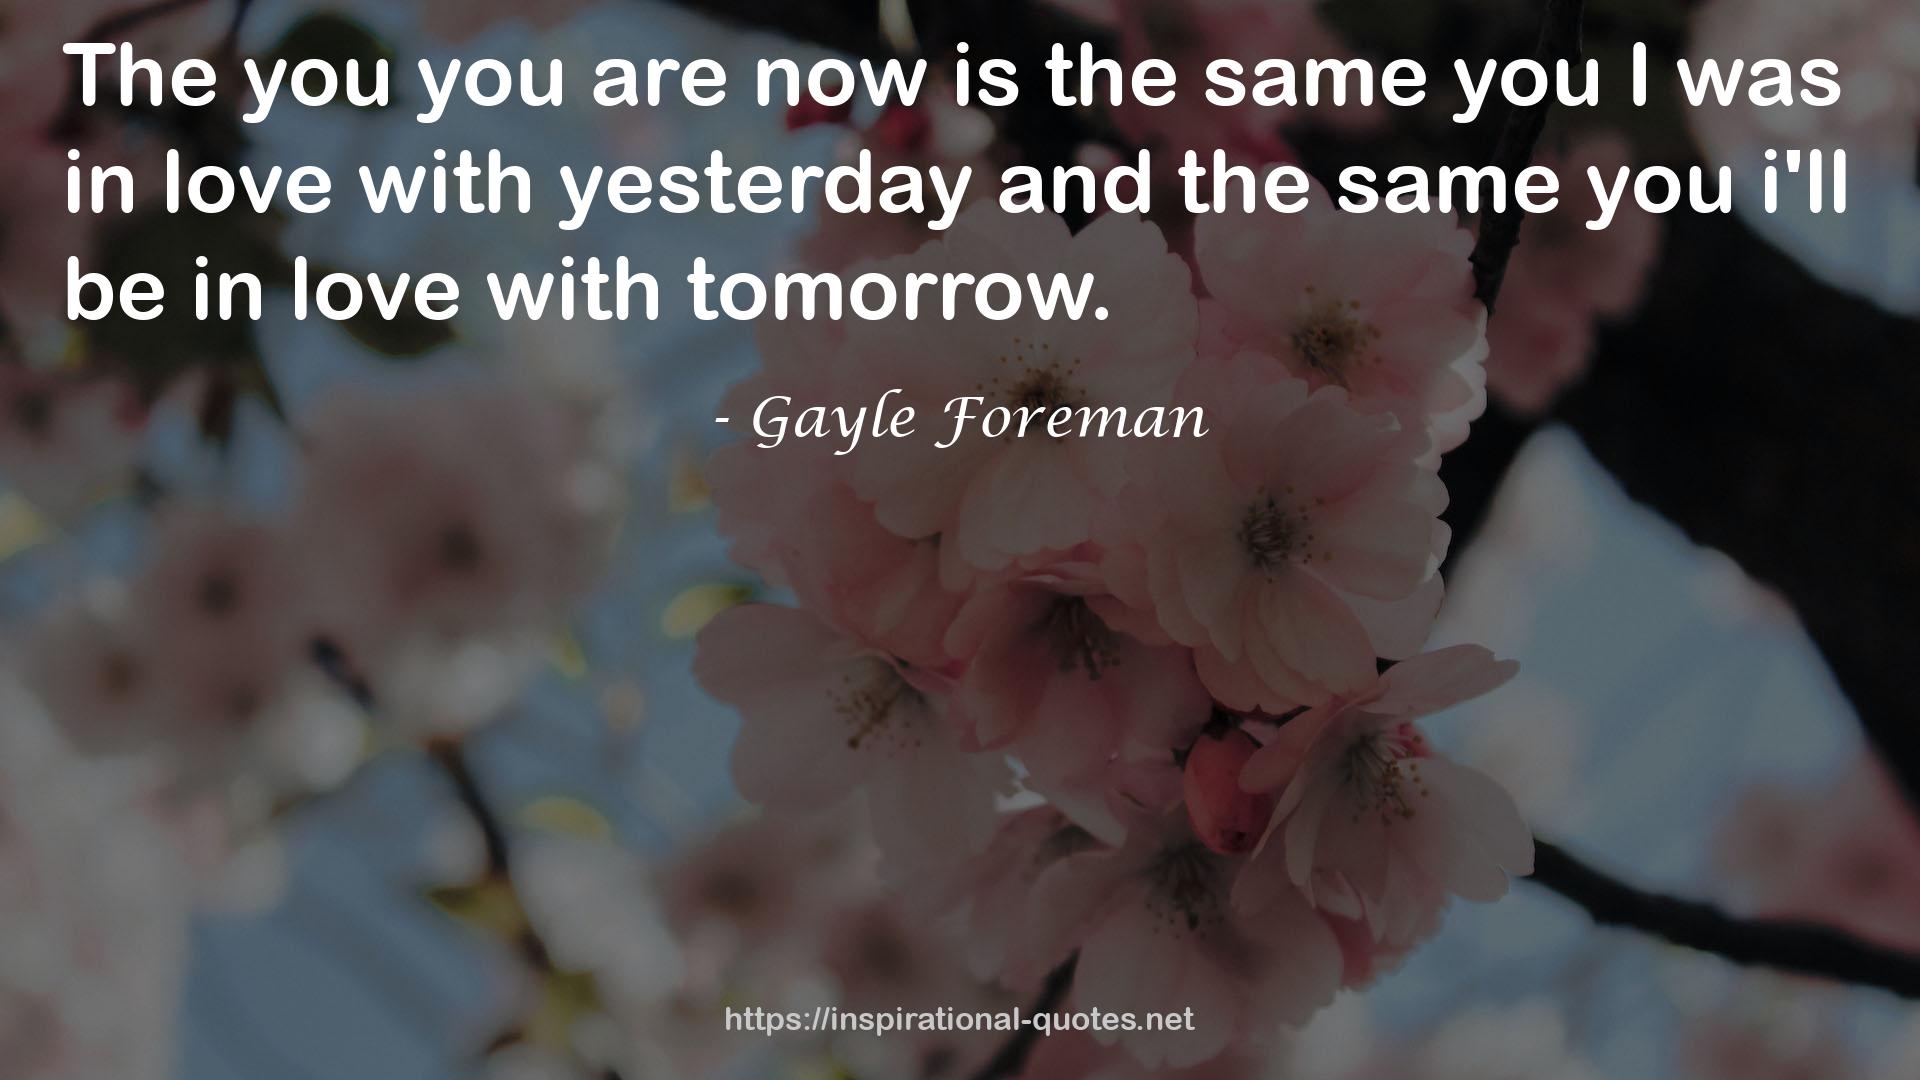 Gayle Foreman QUOTES